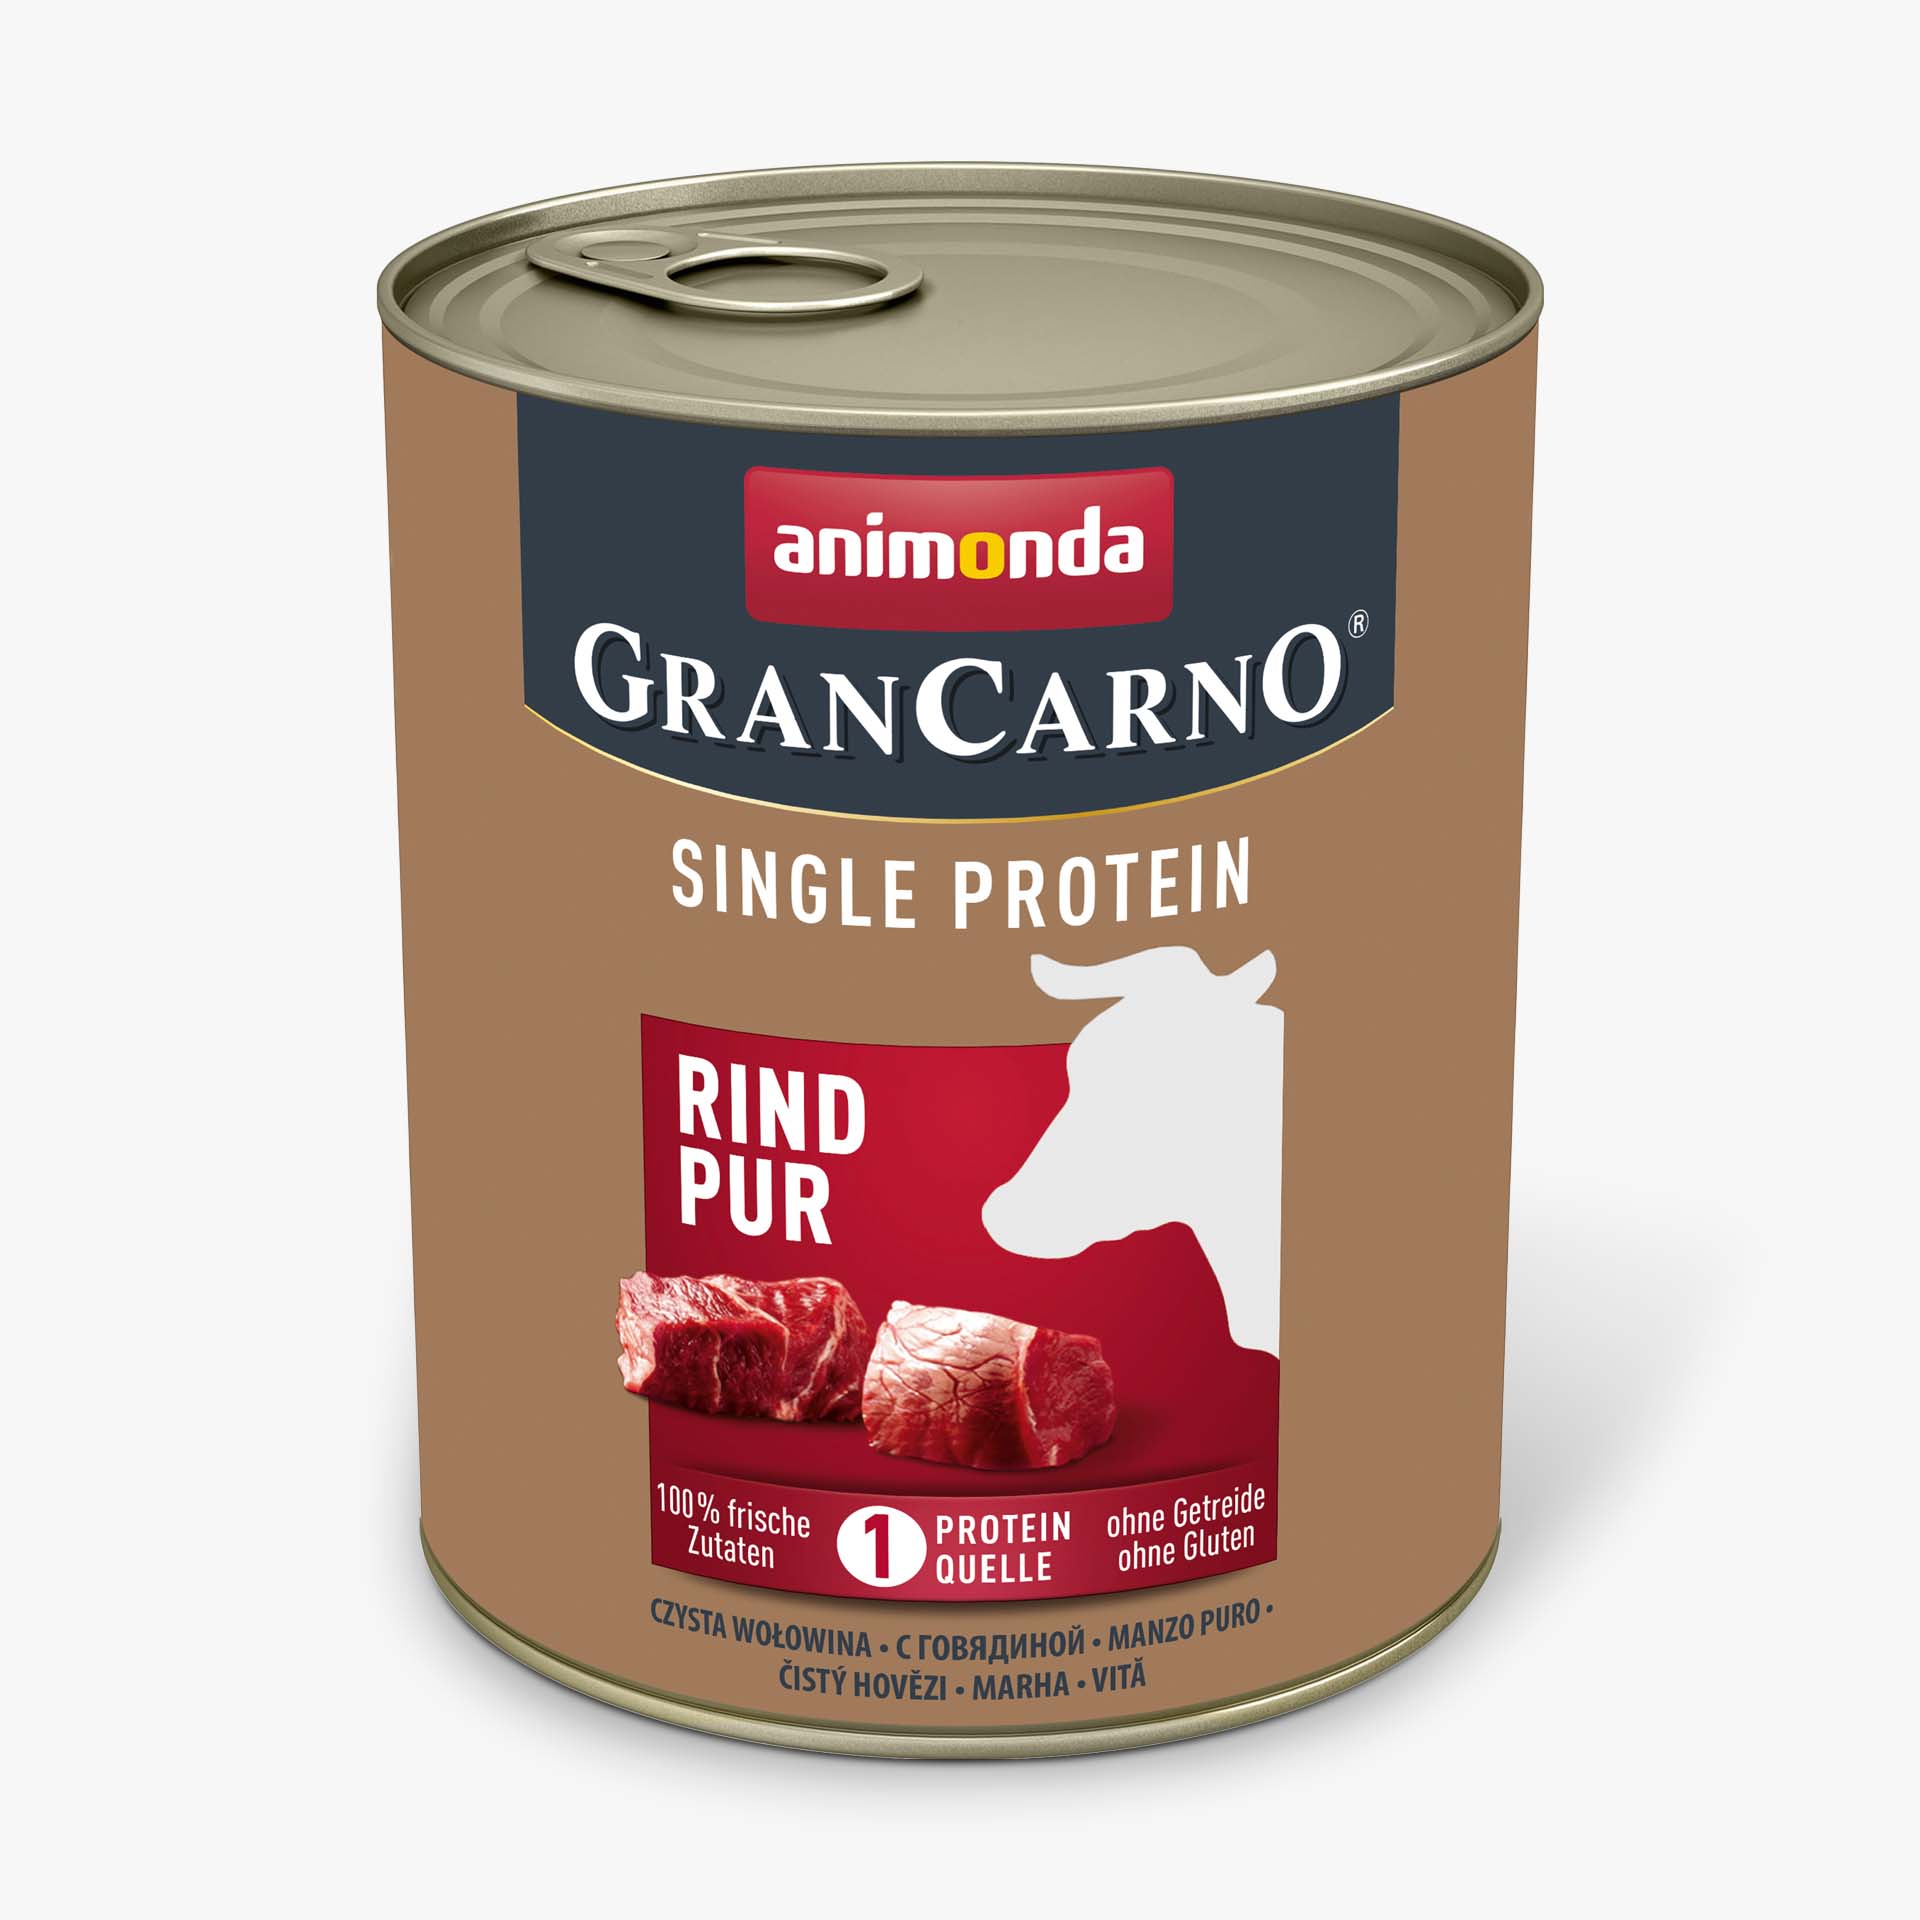 GranCarno Single Protein Adult Rind pur